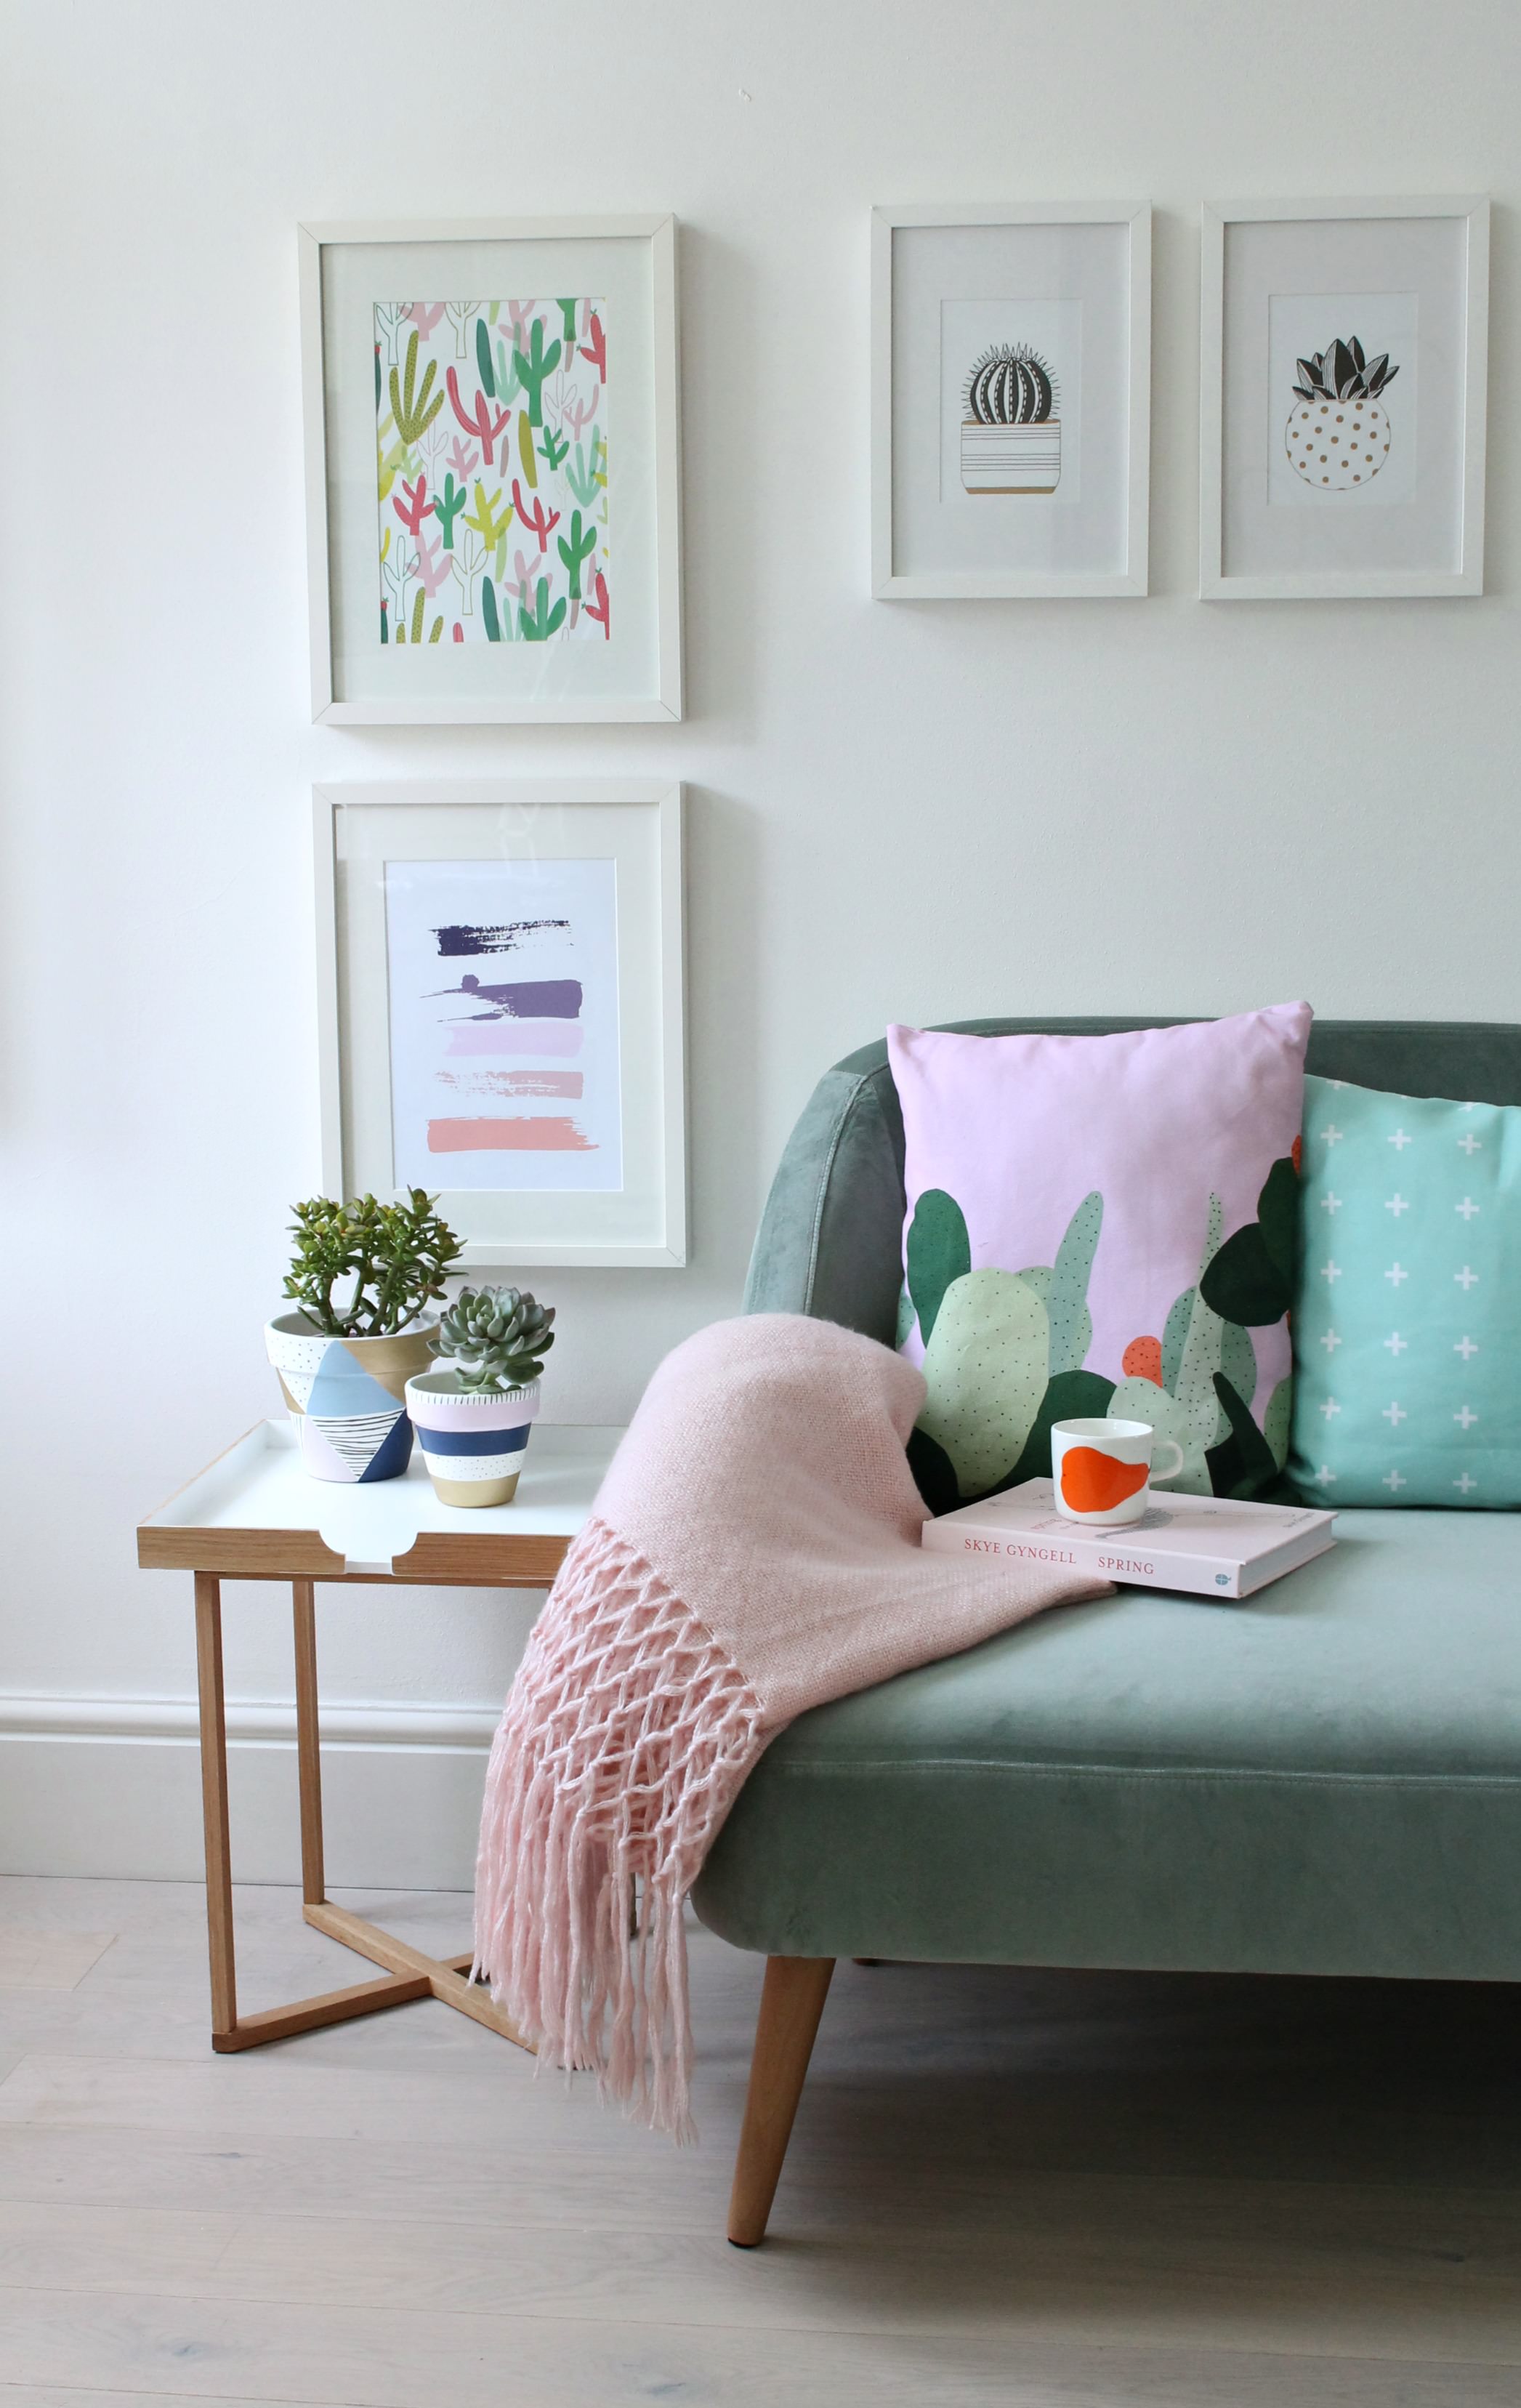 Green-velvet-sofa-from-Habitat-and-Etsy-prints-photo-by-Little-Big-Bell